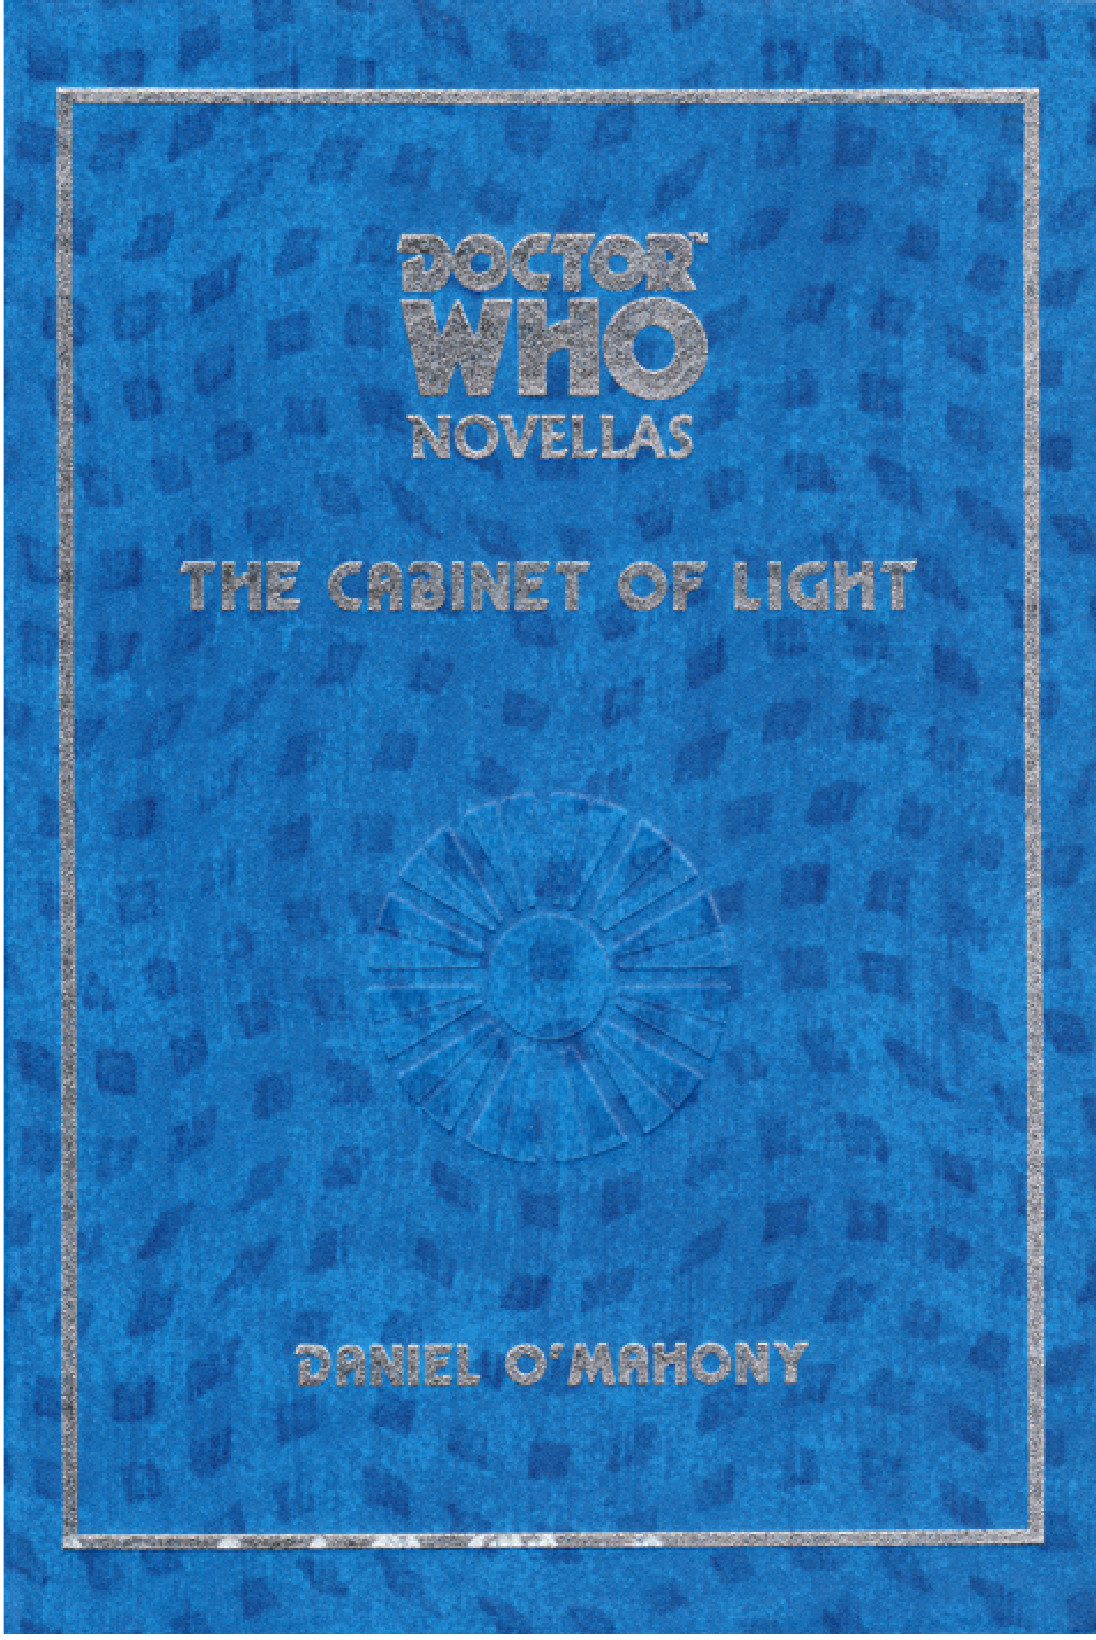 Doctor Who: The Cabinet of Light